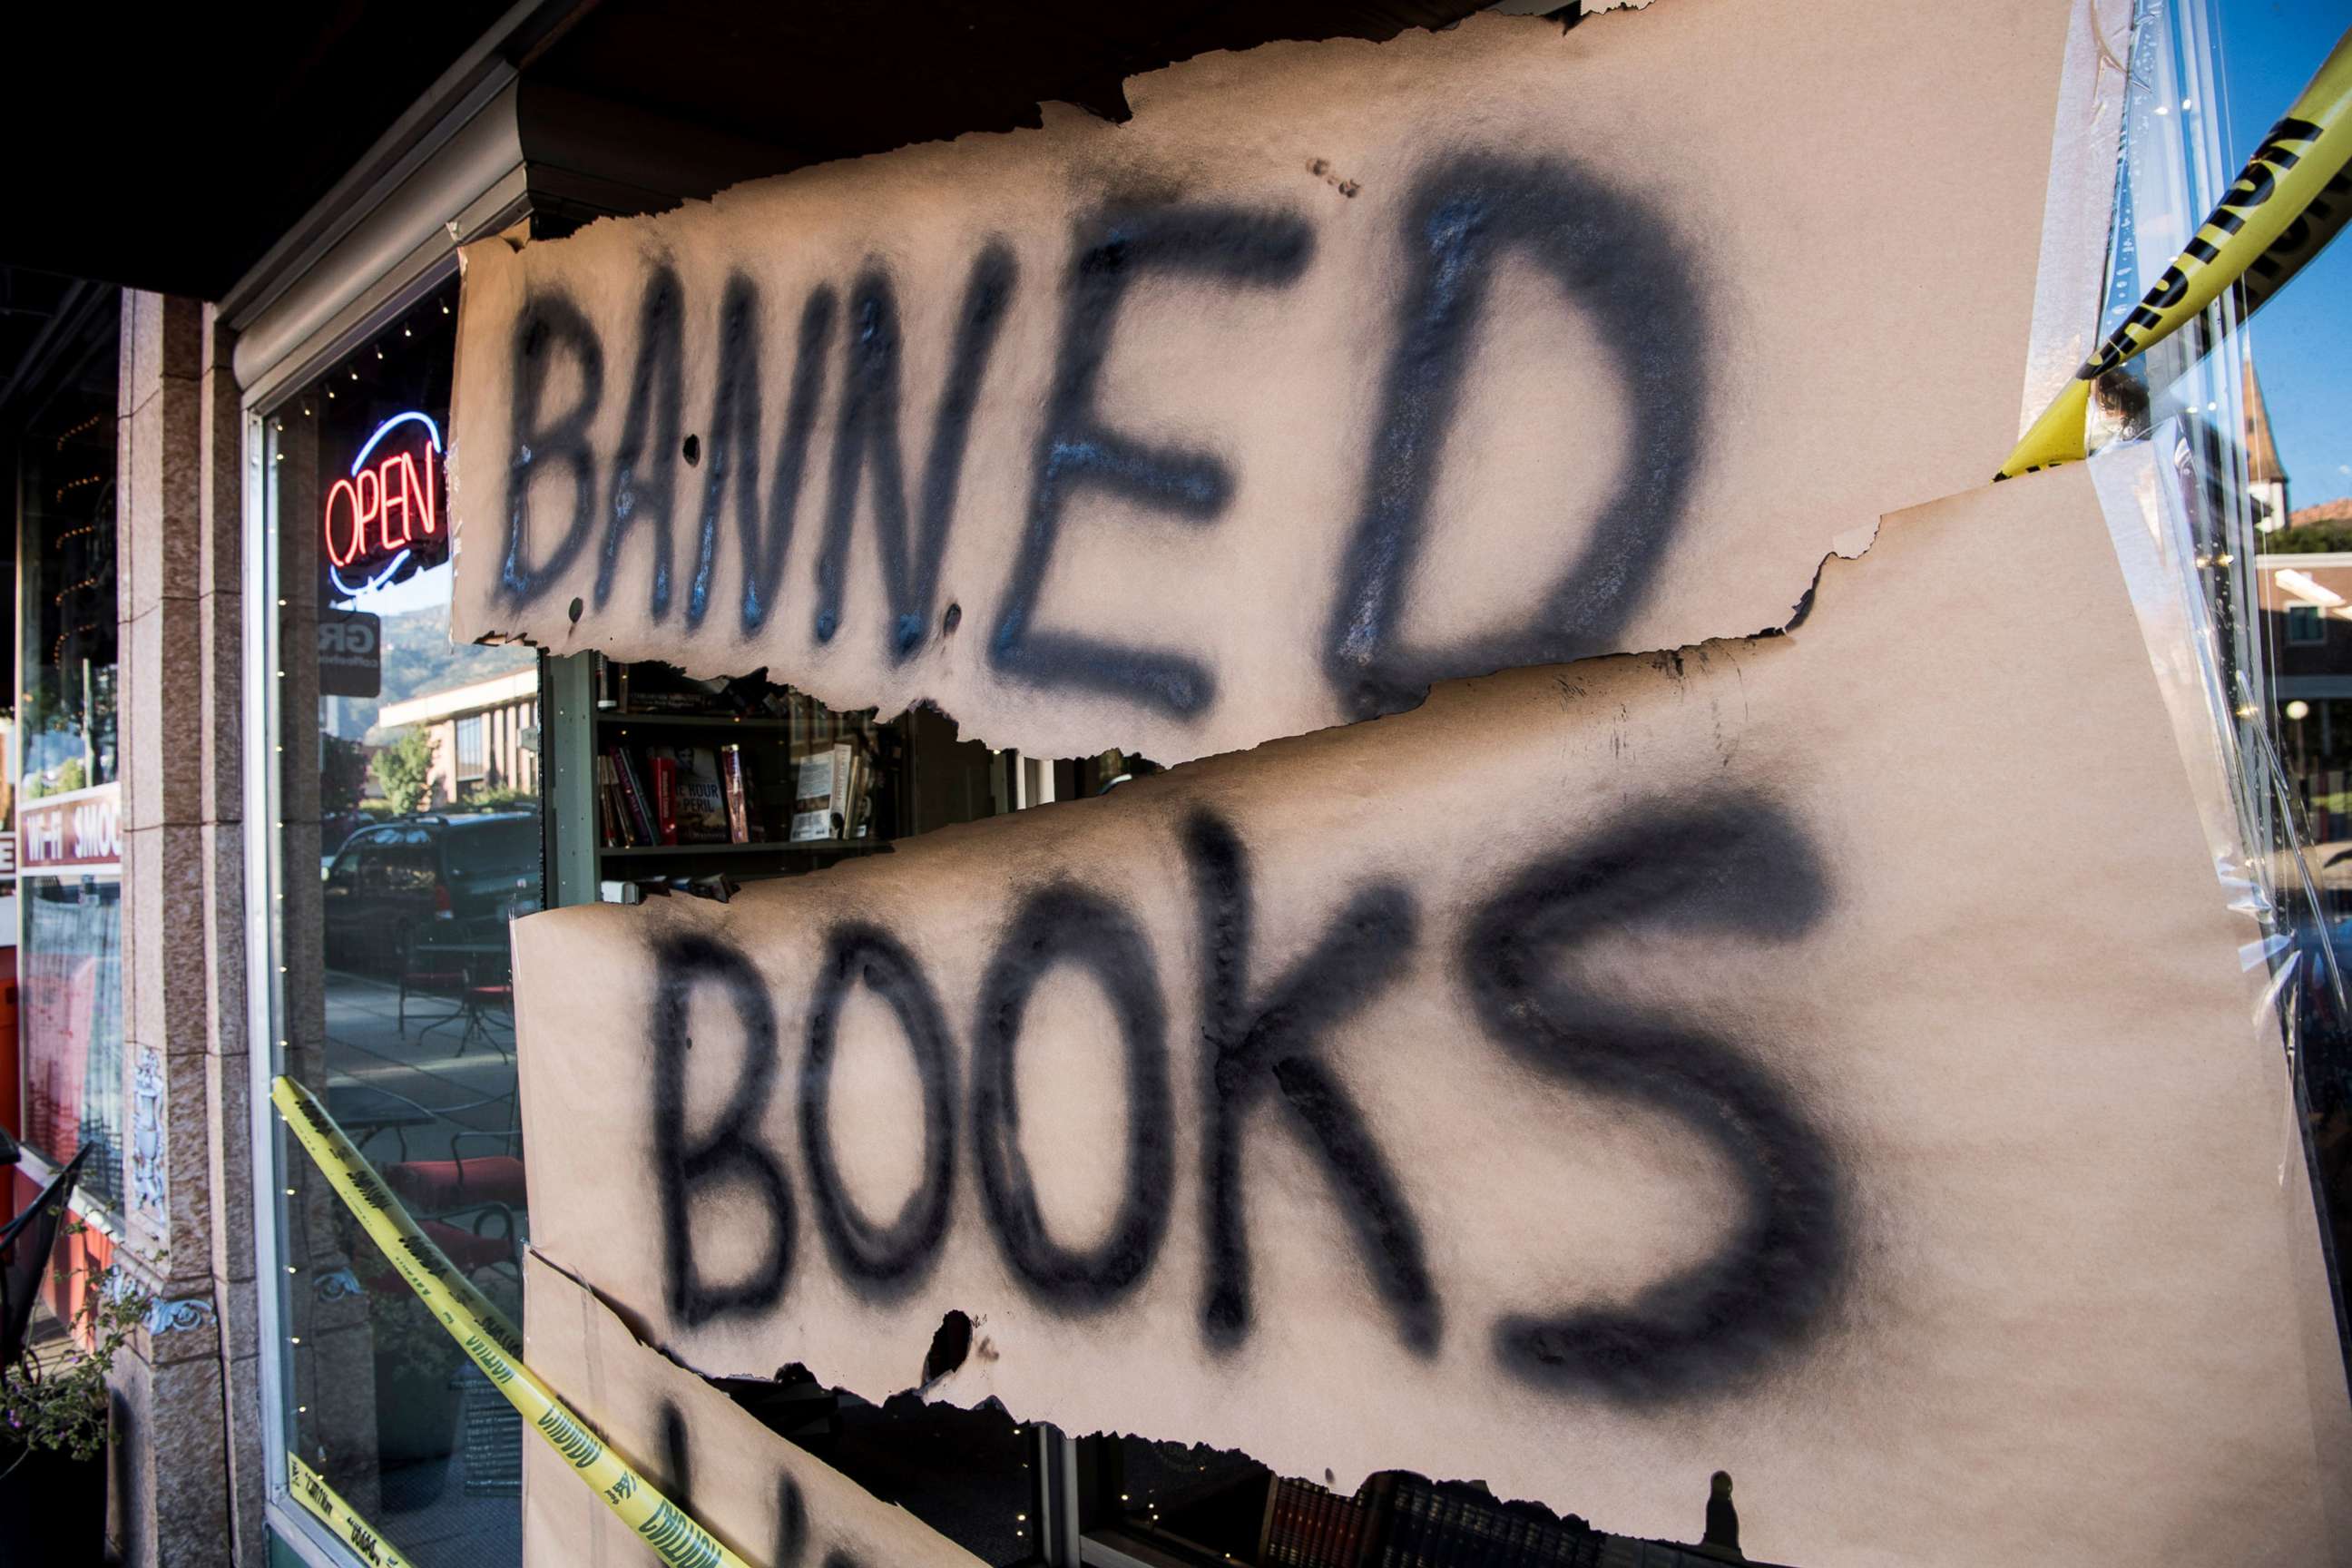 PHOTO: A sign wrapped in caution tape reading "Banned Books Week" is displayed at Main Street Books bookstore during Banned Books Week, on Sept. 26, 2018 in Cedar City, Utah. 